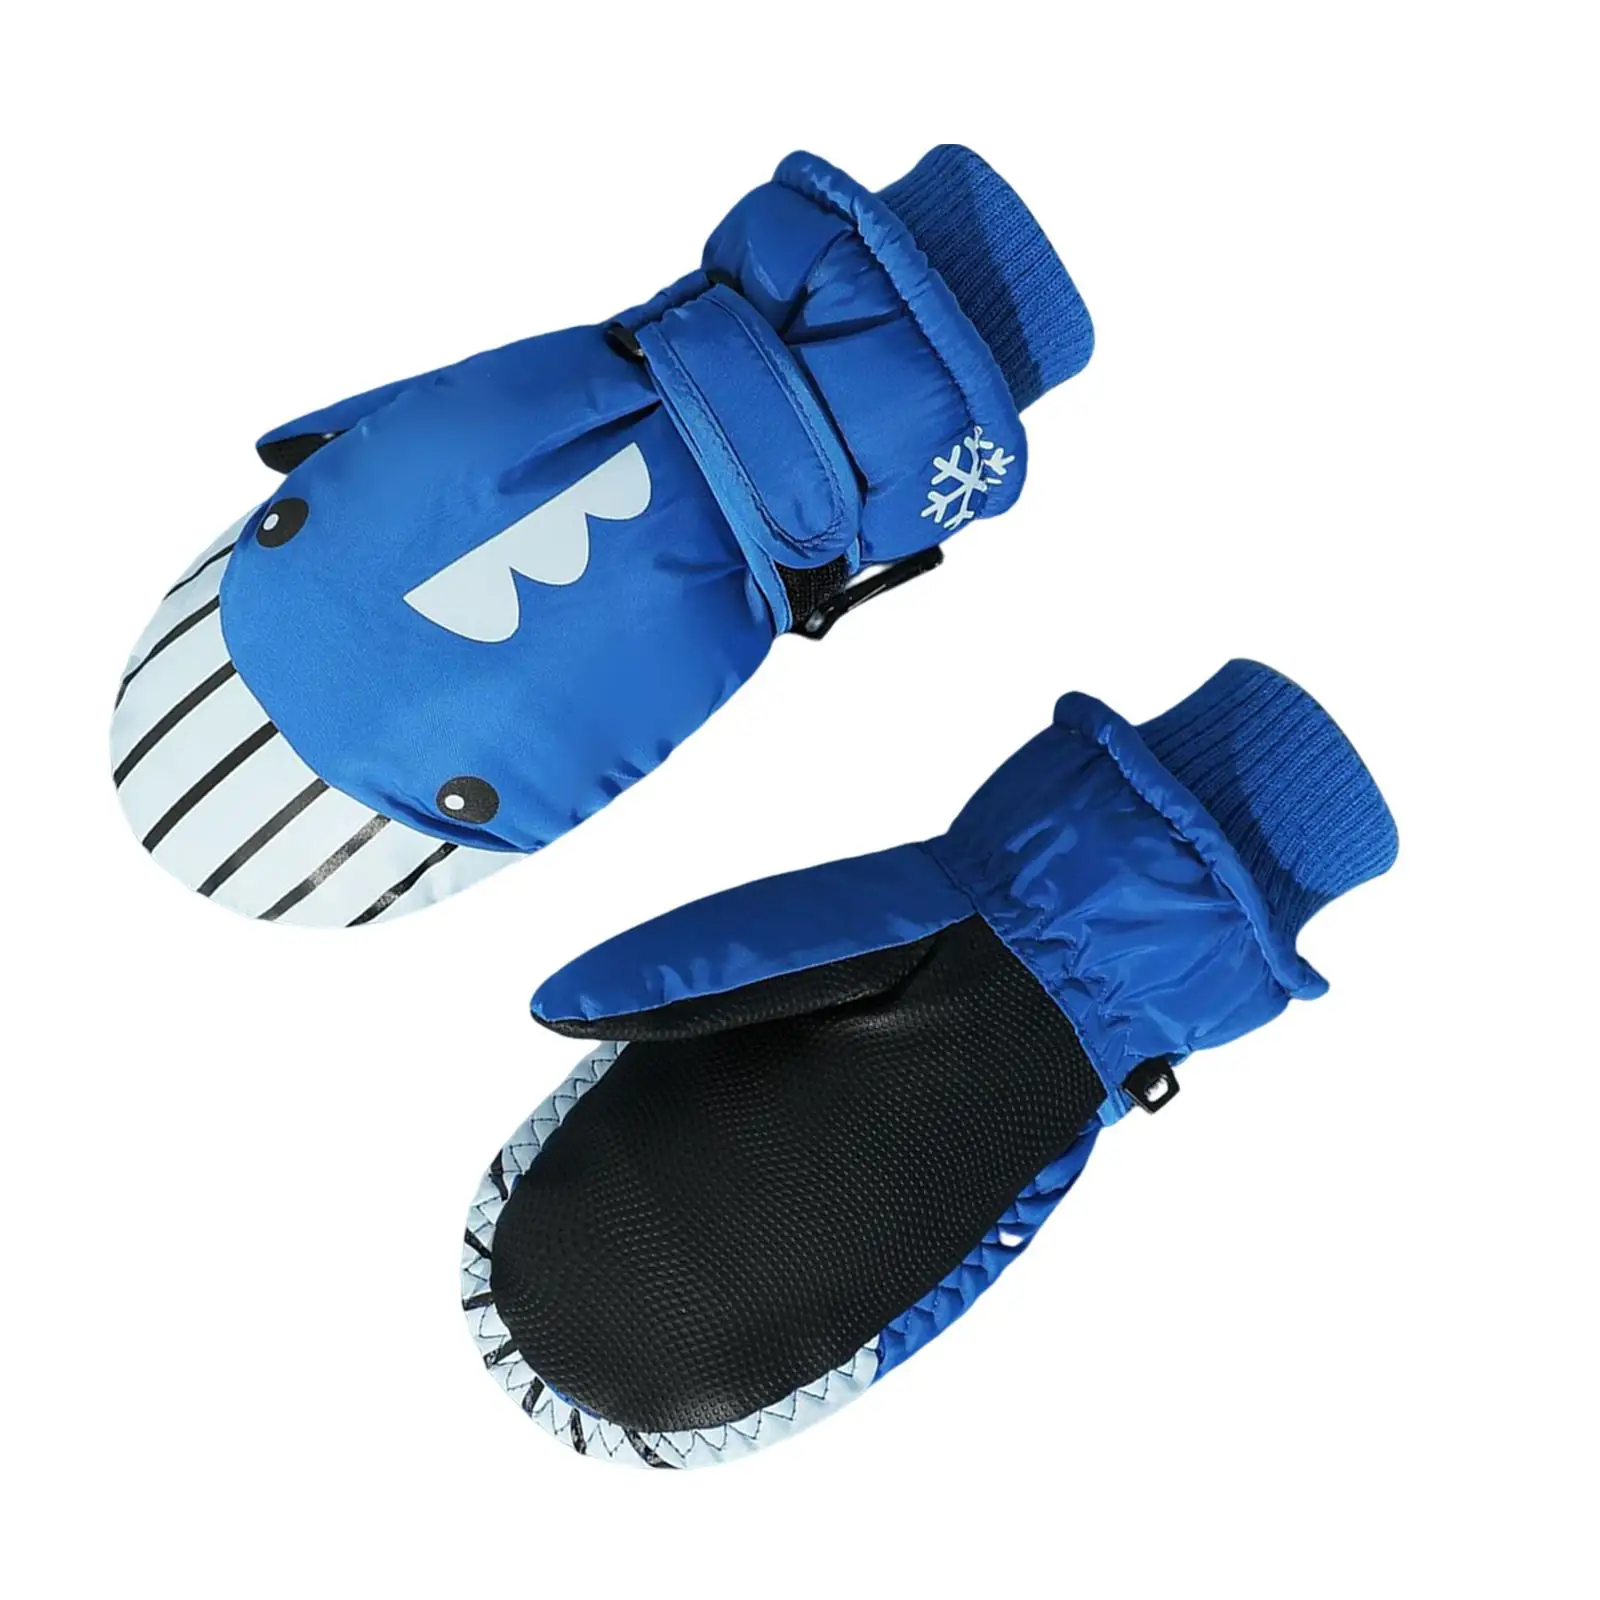 Mittens Practical Durable Warm Waterproof Thickened Winter Comfortable Adjustable Snow Ski Gloves for Outdoor Toddler Children